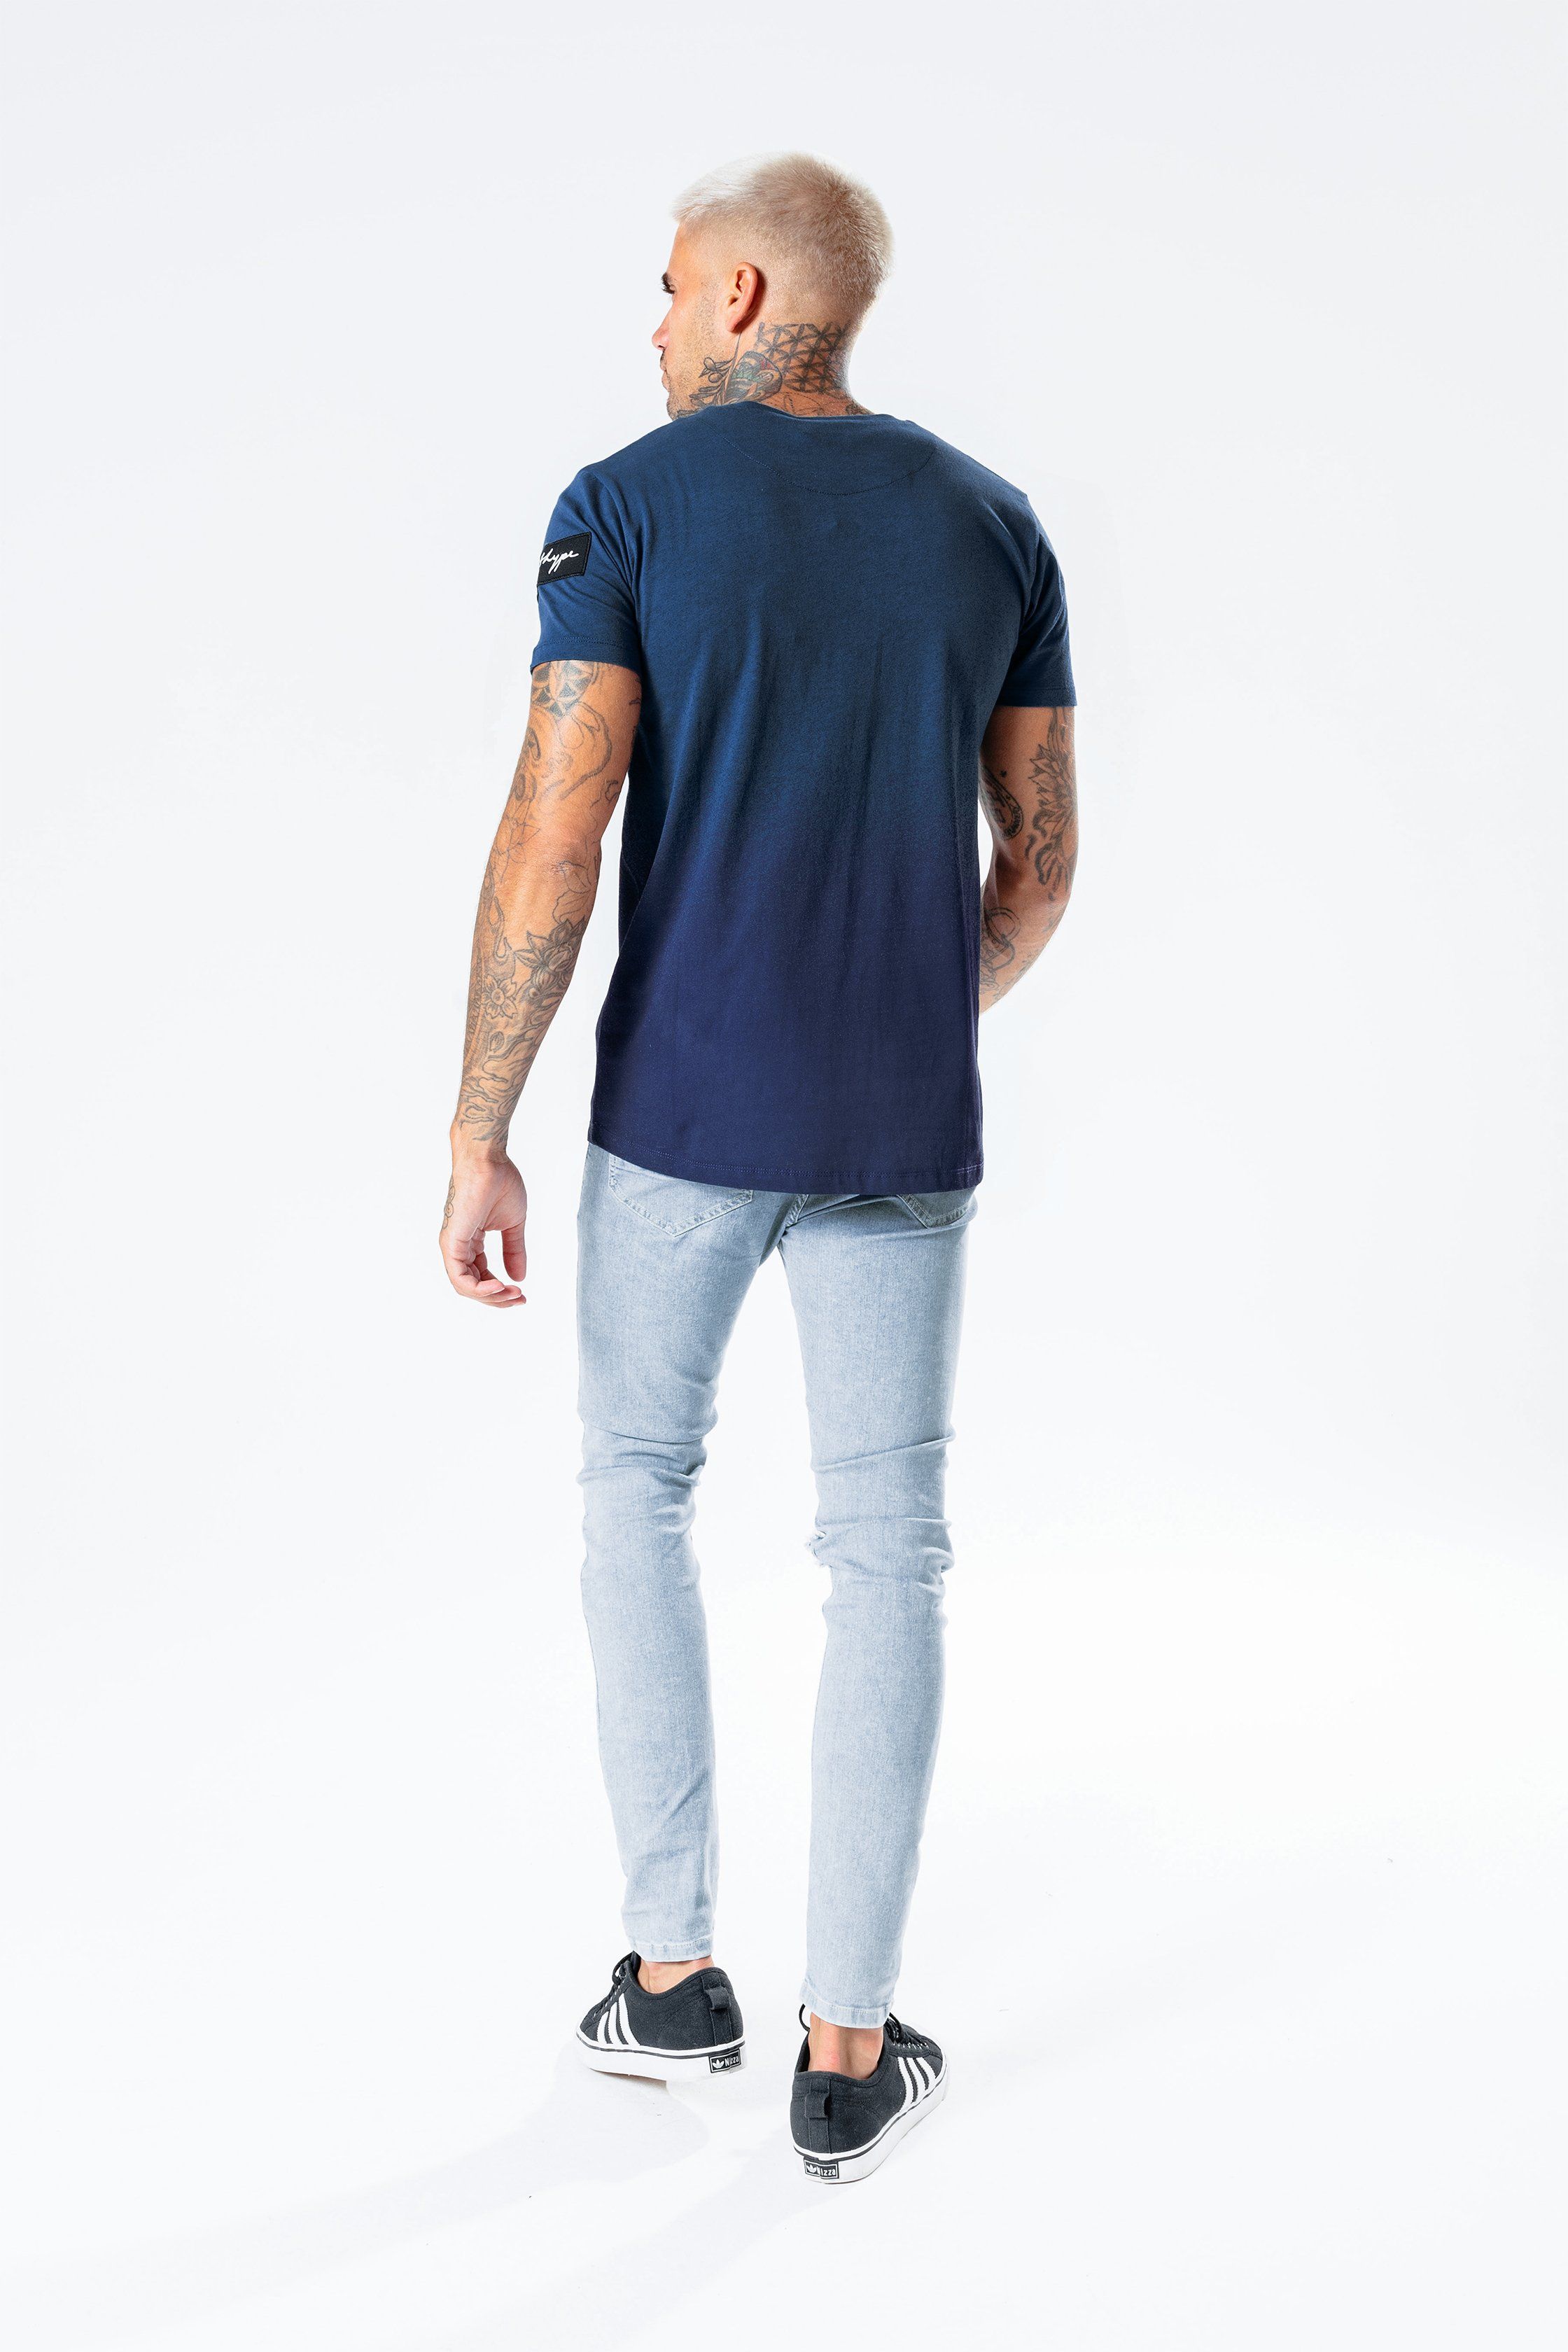 The HYPE. blue speckle fade men's t-shirt pairs perfectly with the HYPE. men's grey joggers. Coming in with a blue and navy colour palette in an 100% cotton fabric base for supreme comfort. Designed in our standard men's tee shape, with a crew neck line and short sleeves for a classic cut. In an all over speckle and fade effect prints. Finished with an embroidered embossed sleeve patch. Wear with black skinny fit jeans for a smart-casual vibe. Machine wash at 30 degrees.